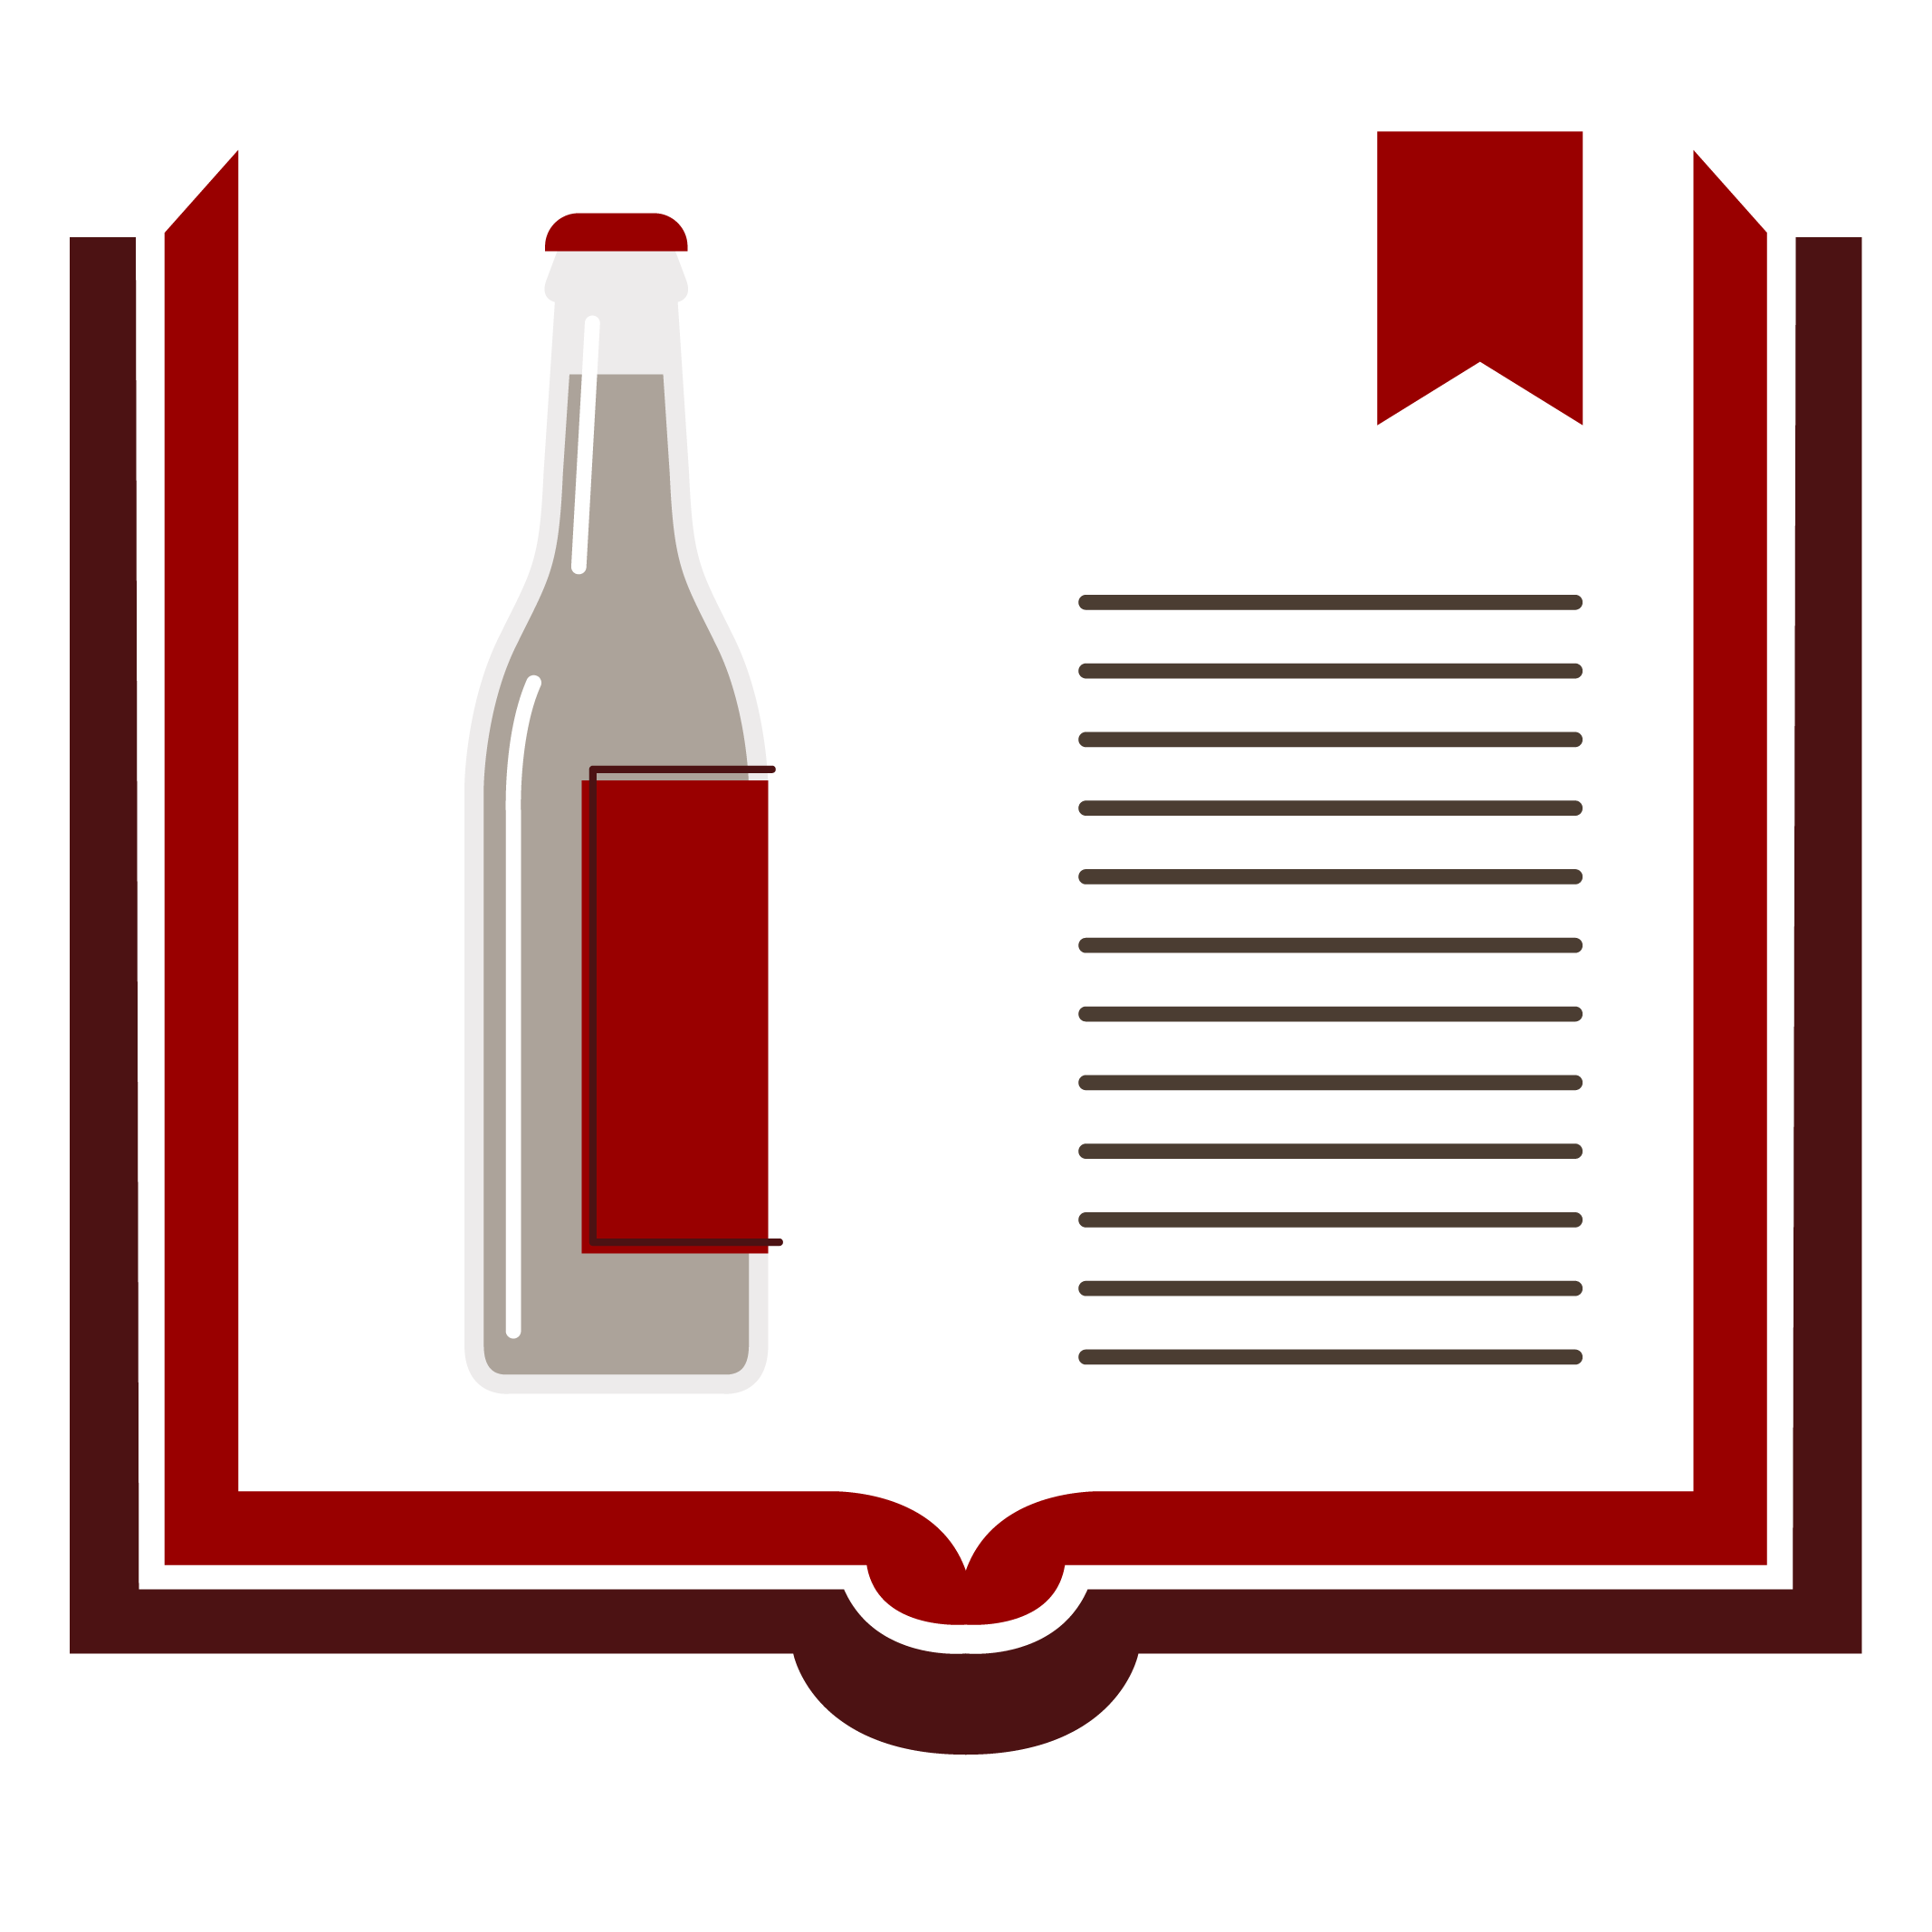 Illustration of open book with icon of alcohol bottle on page